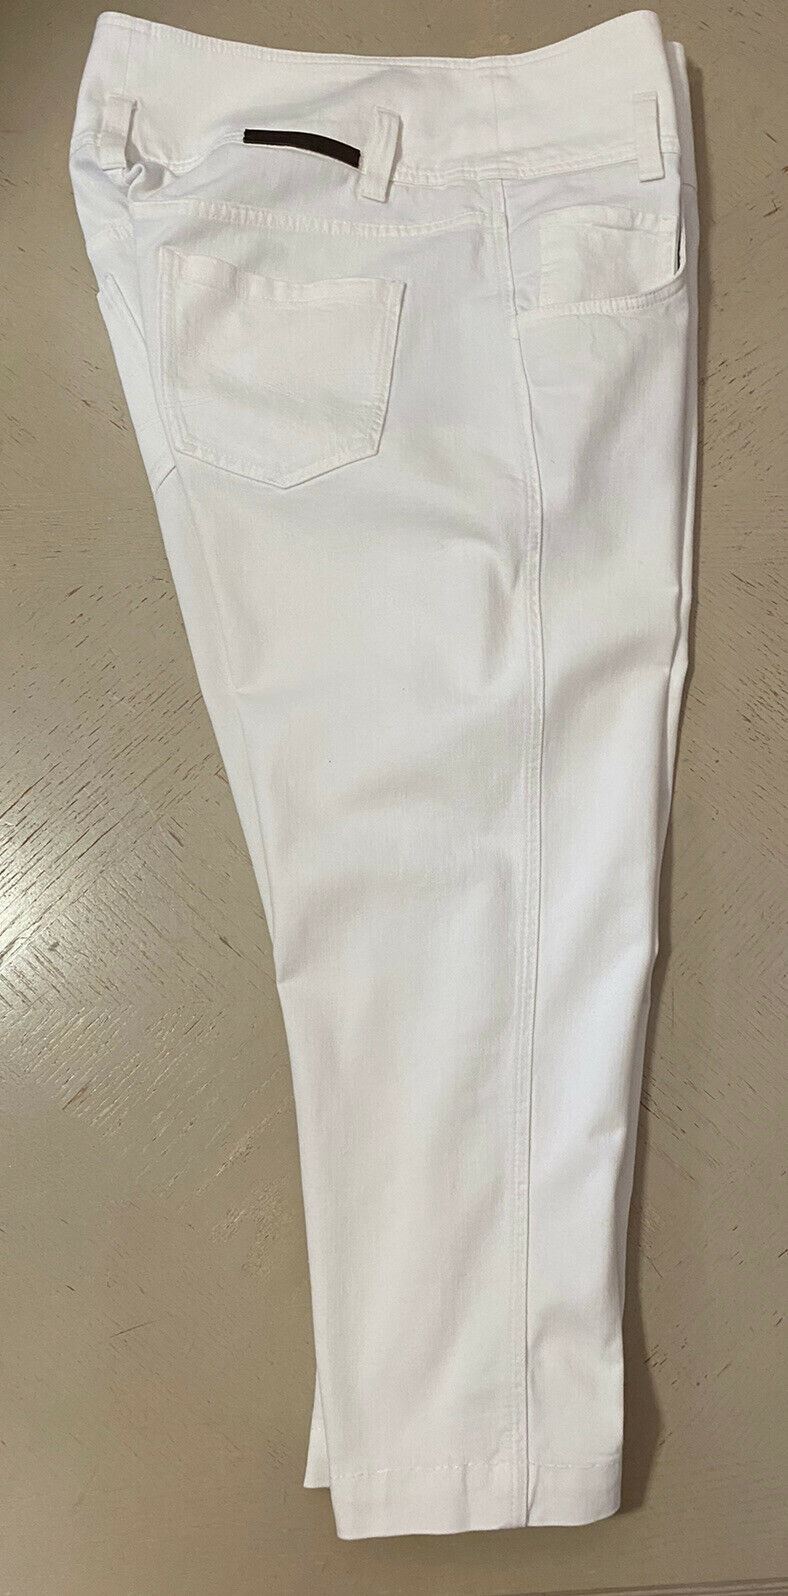 New $970 Brunello Cucinelli Women’s Jeans Pants White 10 US ( 46 It ) Italy